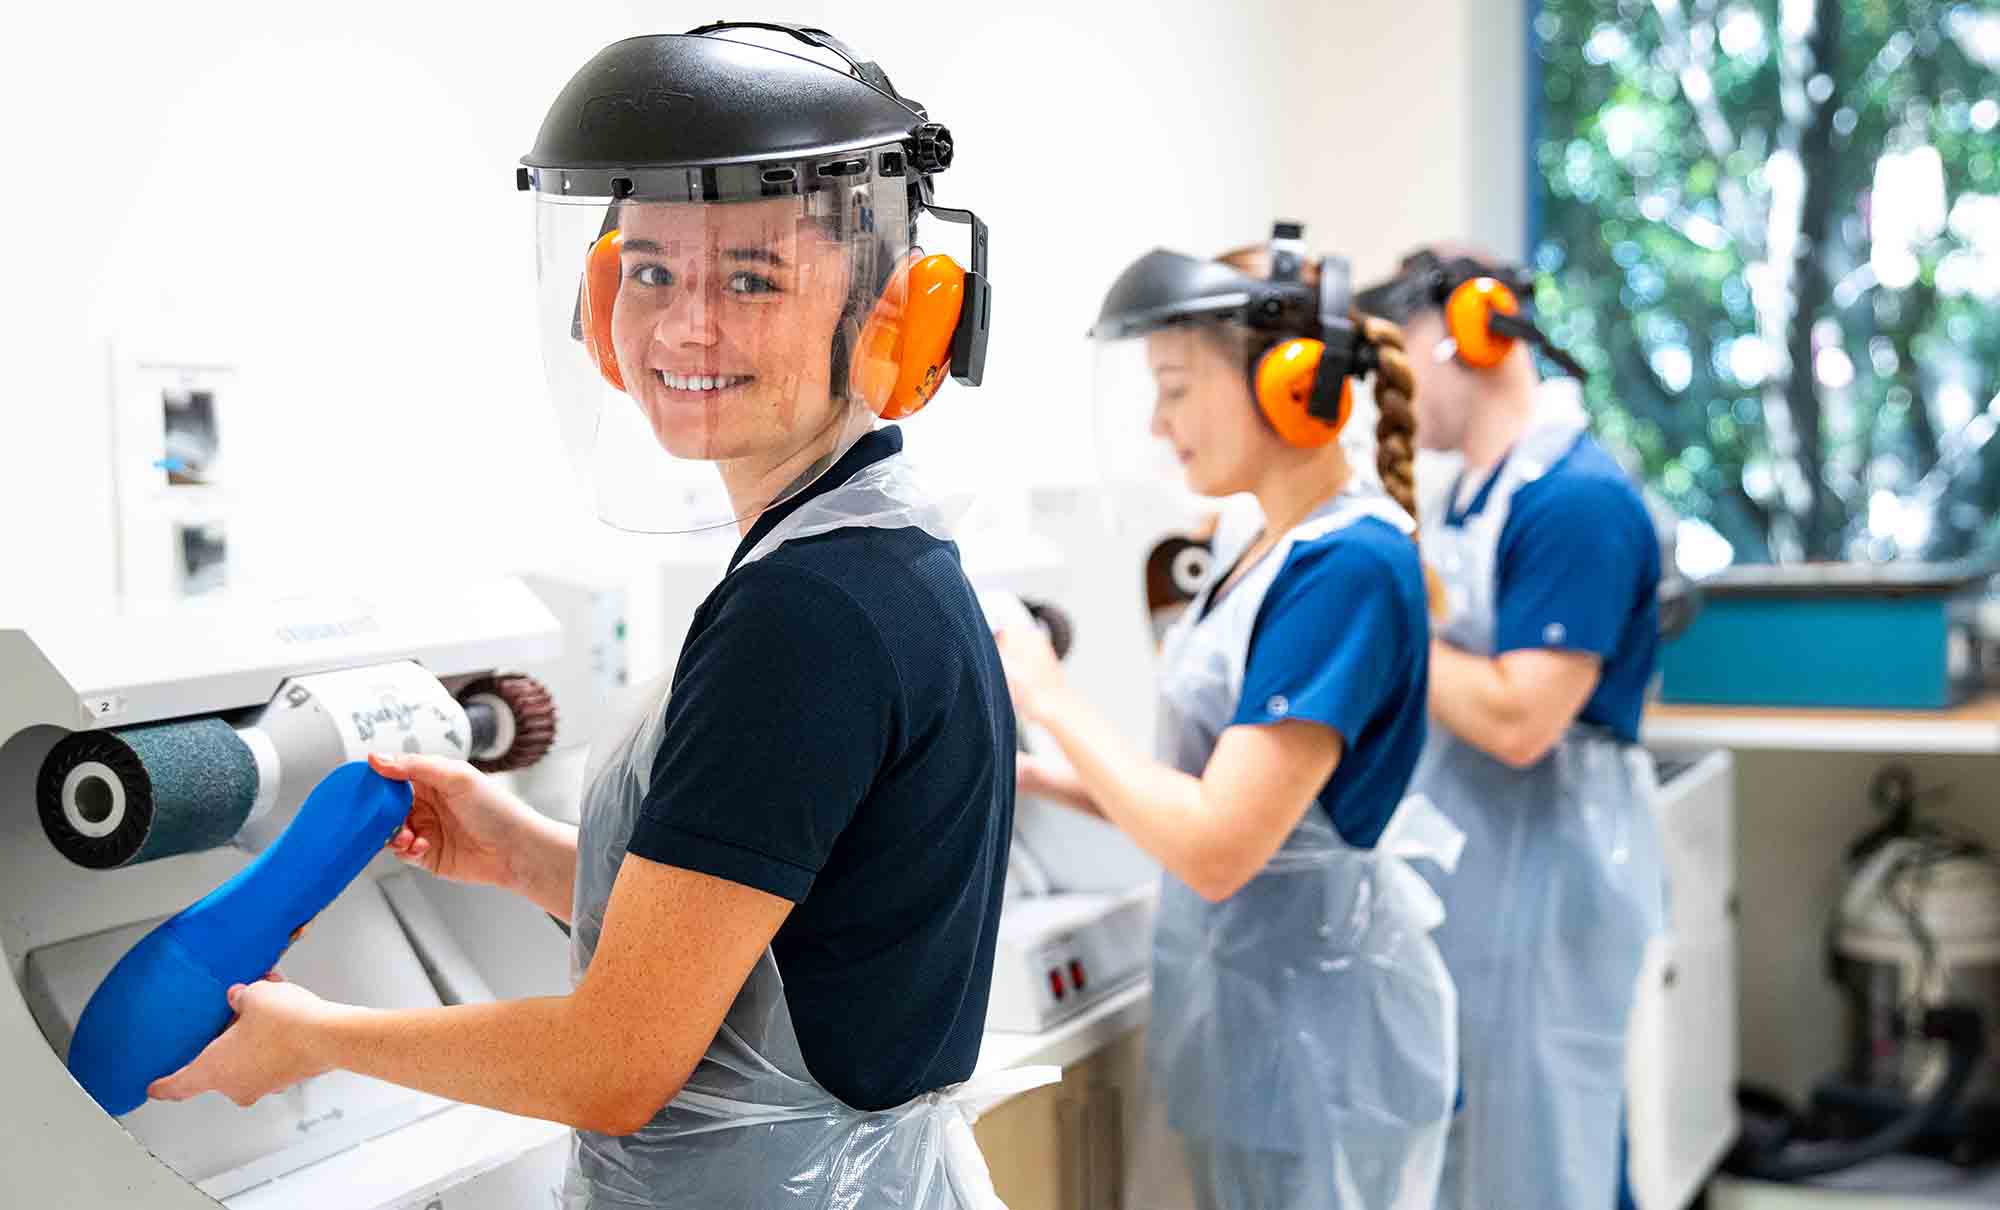 A female student in a QUT polo shirt wears a safety visor as she shapes an orthotic insert on a grinding machine.